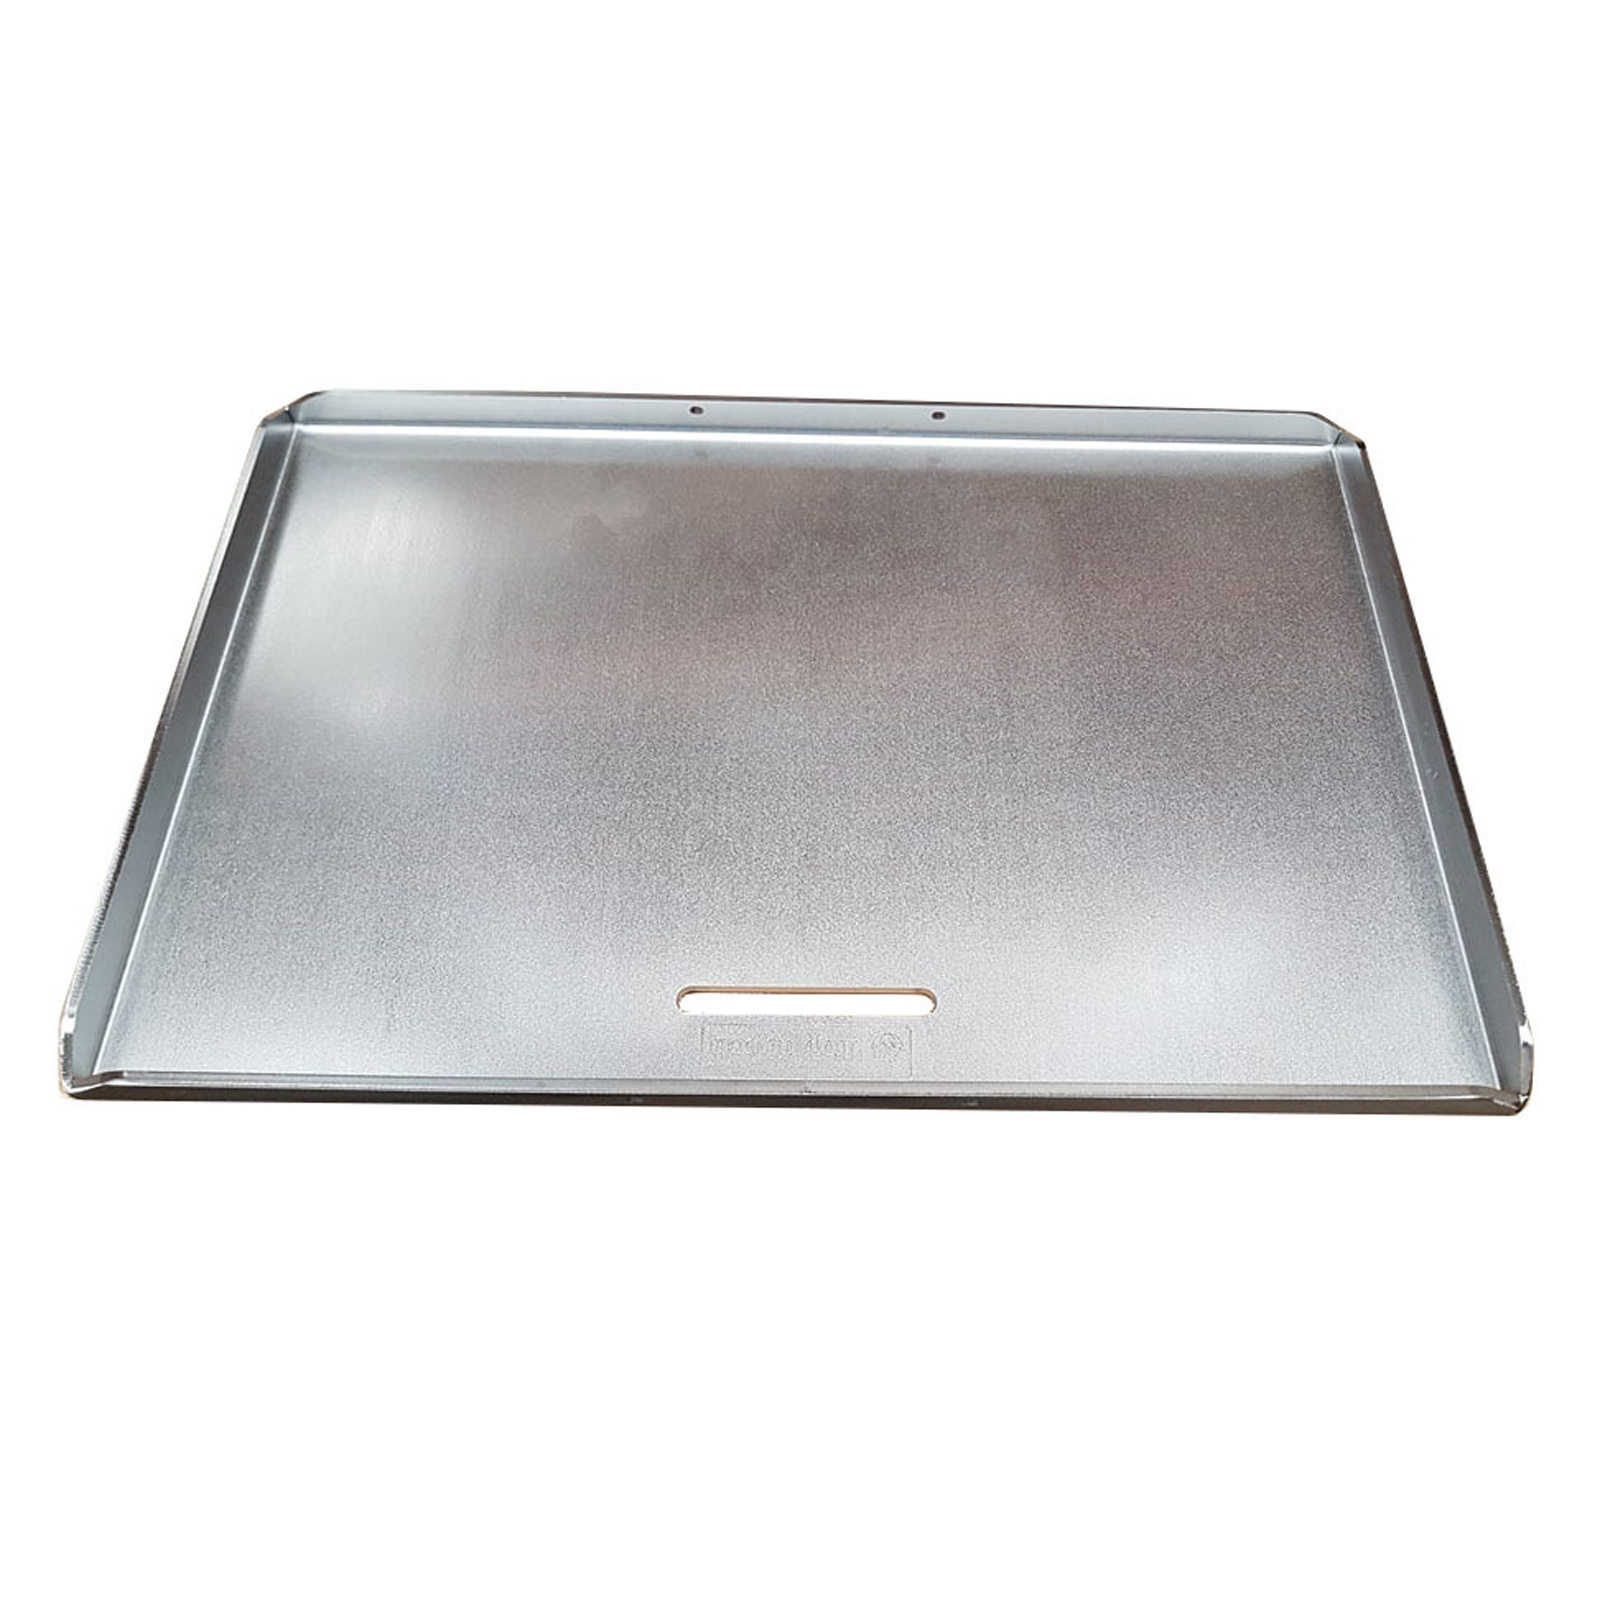 317 LR x 485 FB Topnotch Stainless Steel BBQ Baking Dish Wok Complete with Lid 